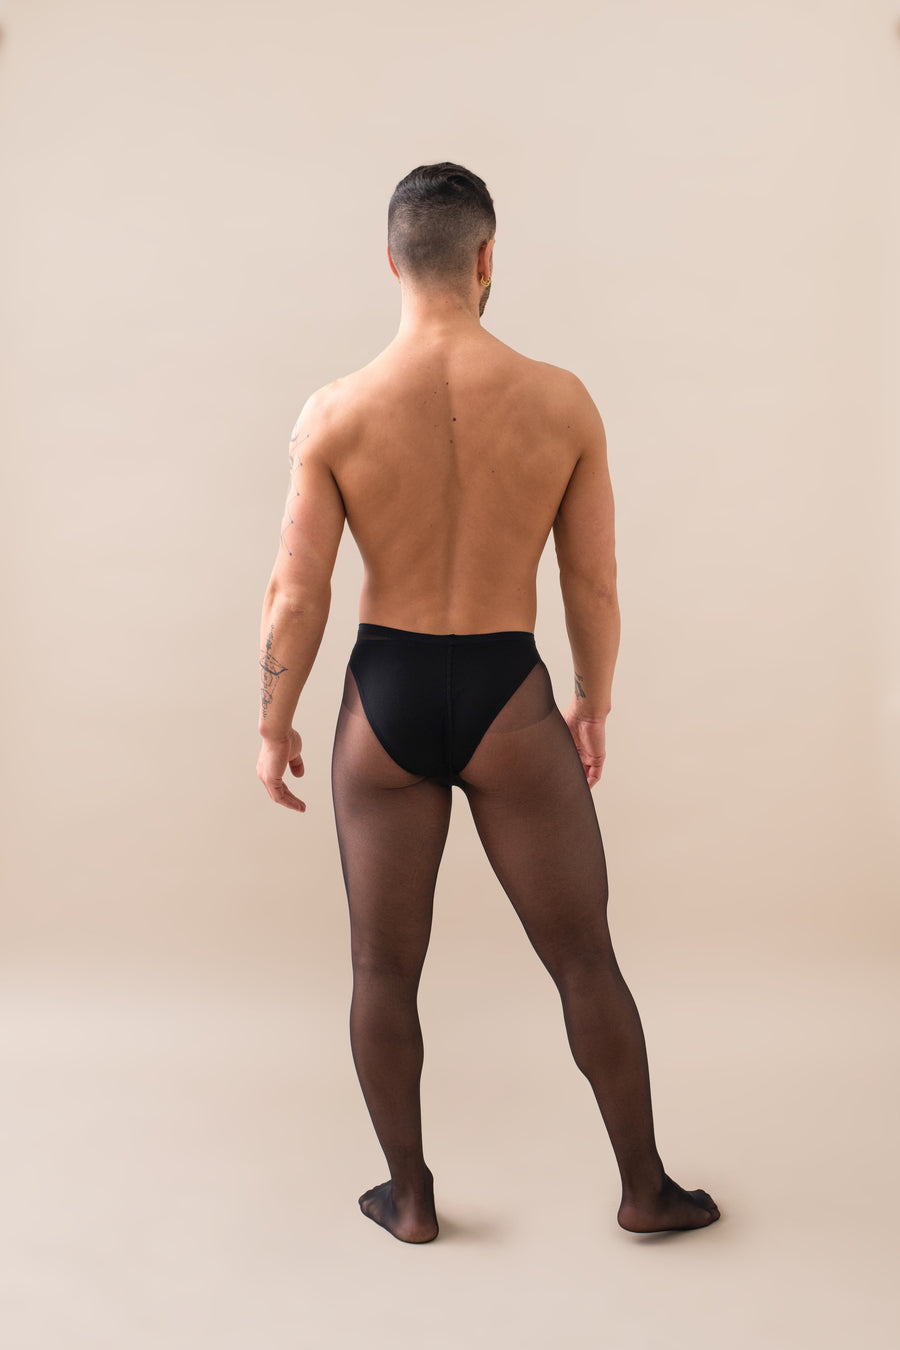 Sheer To Waist Tights - Black worn by model back view